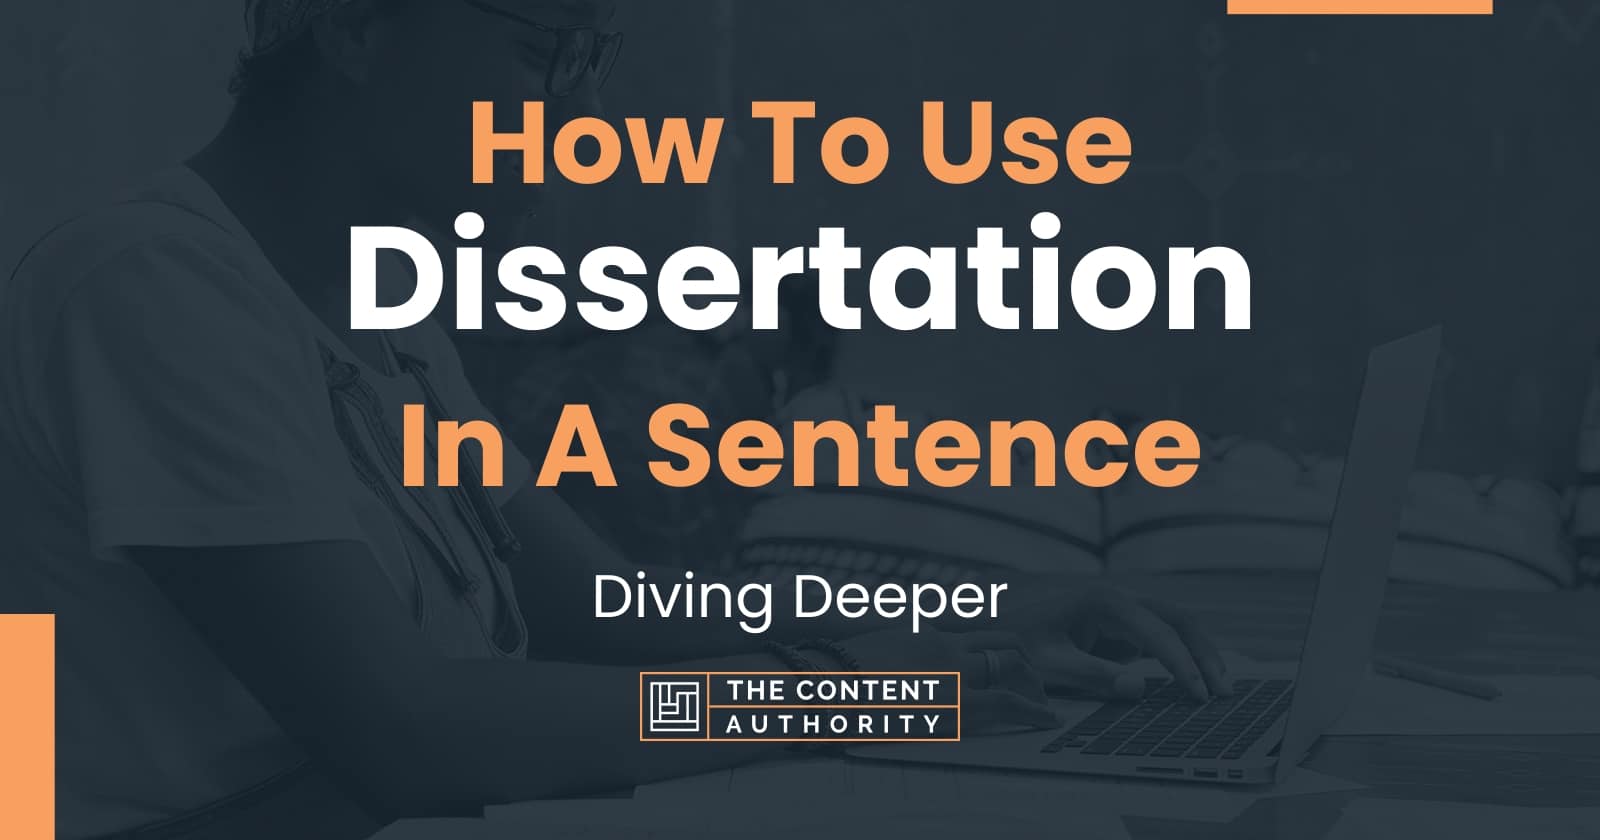 can you use dissertation in a sentence